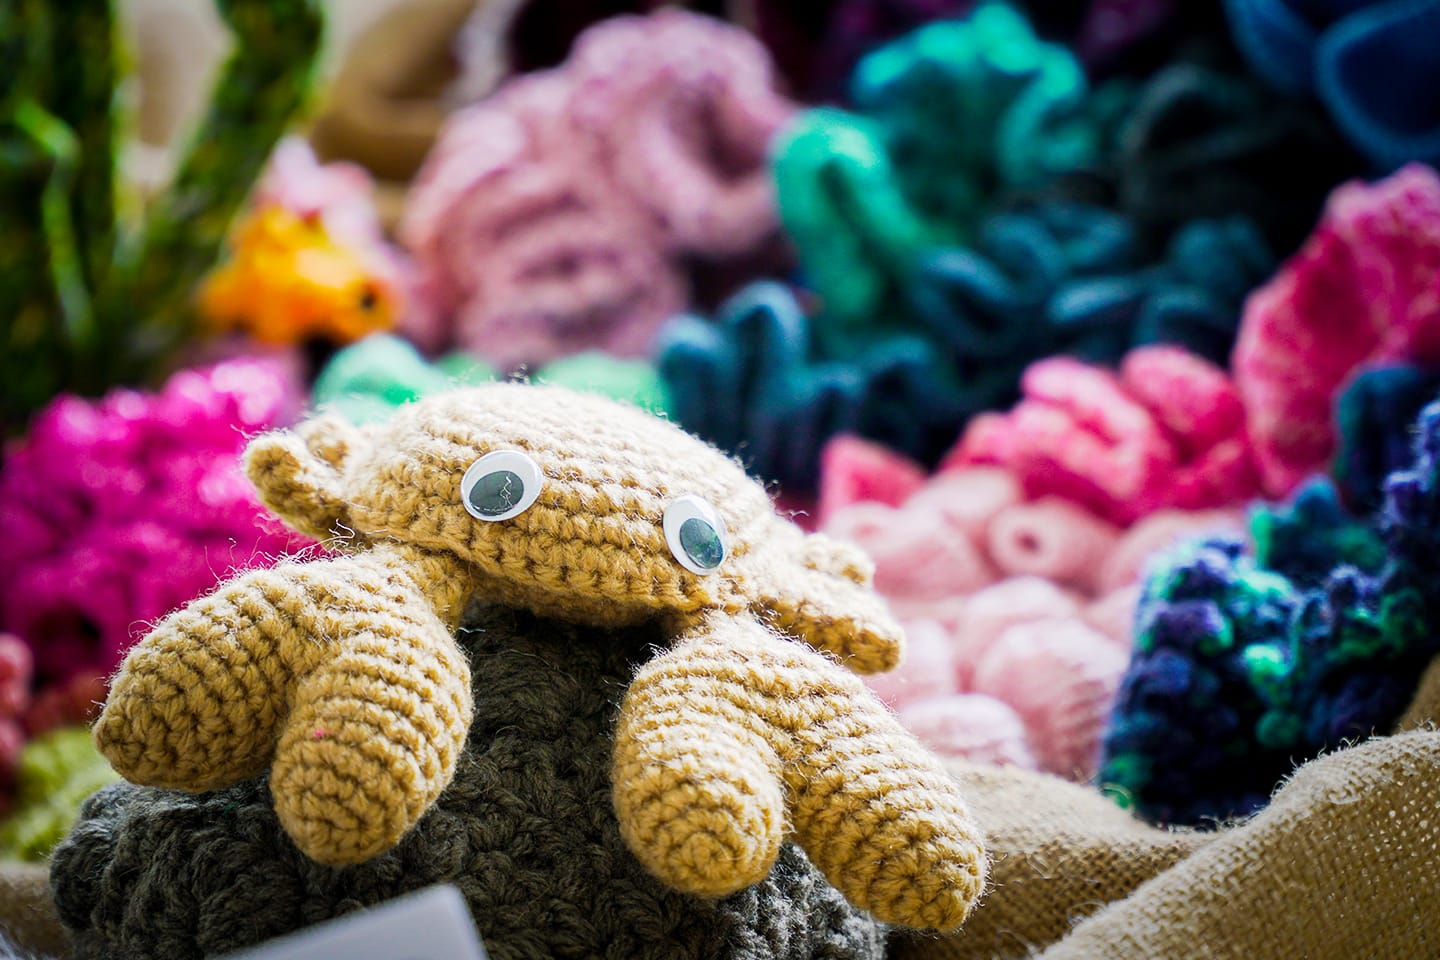 marine life made from yarn to raise awareness about climate change